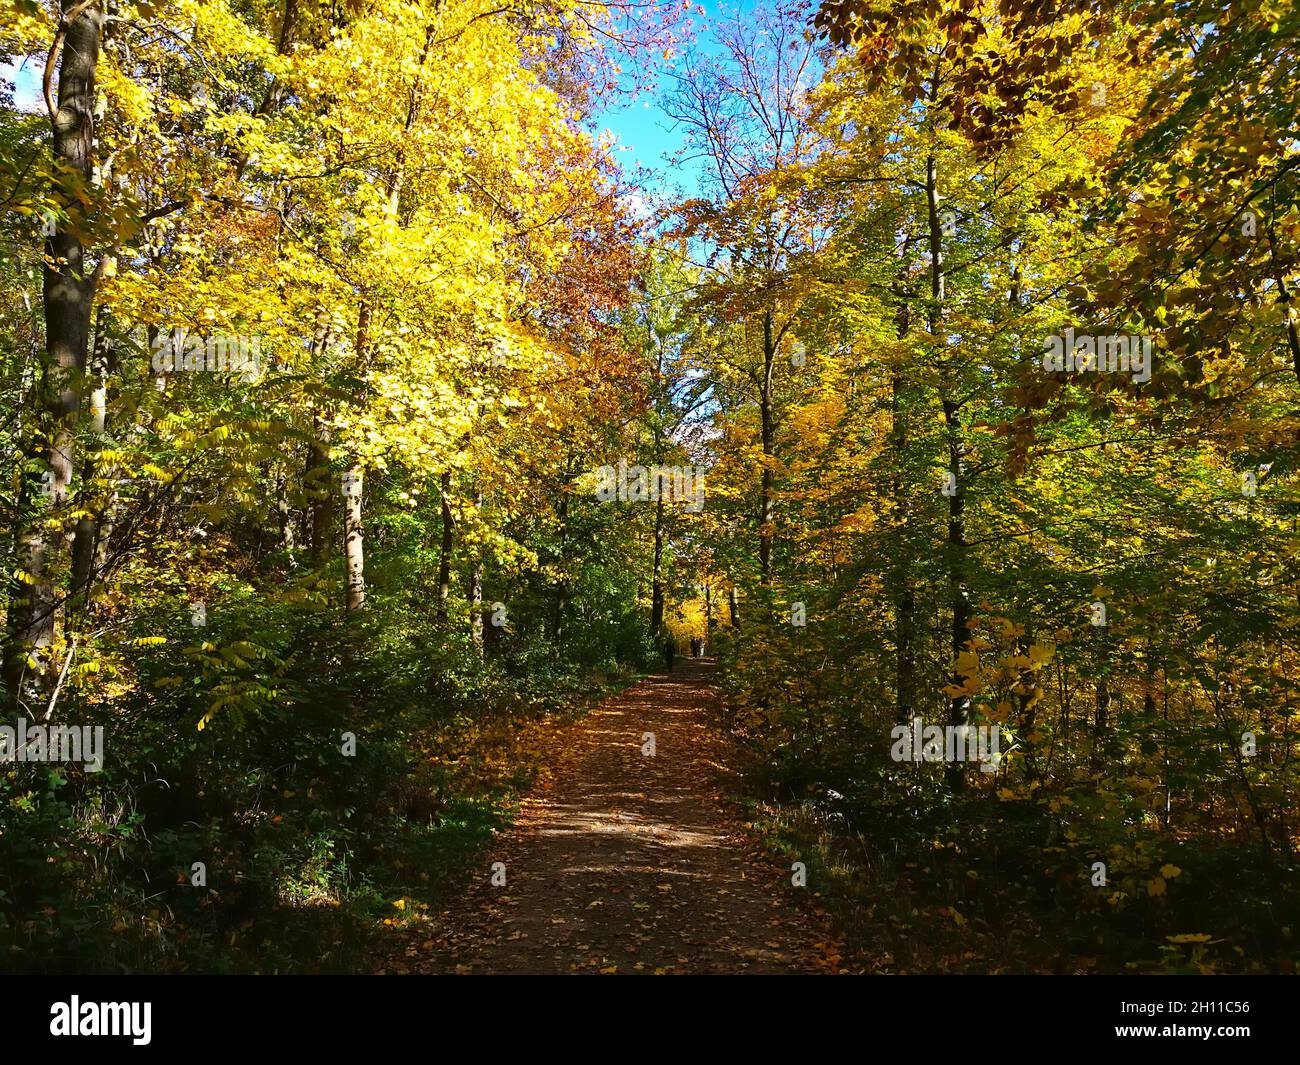 STUTTGART, GERMANY - Oct 24, 2020: Way at Birkenkopf Stuttgart through German broad-leaved forest during autumn with yellow leaves, people walking Stock Photo